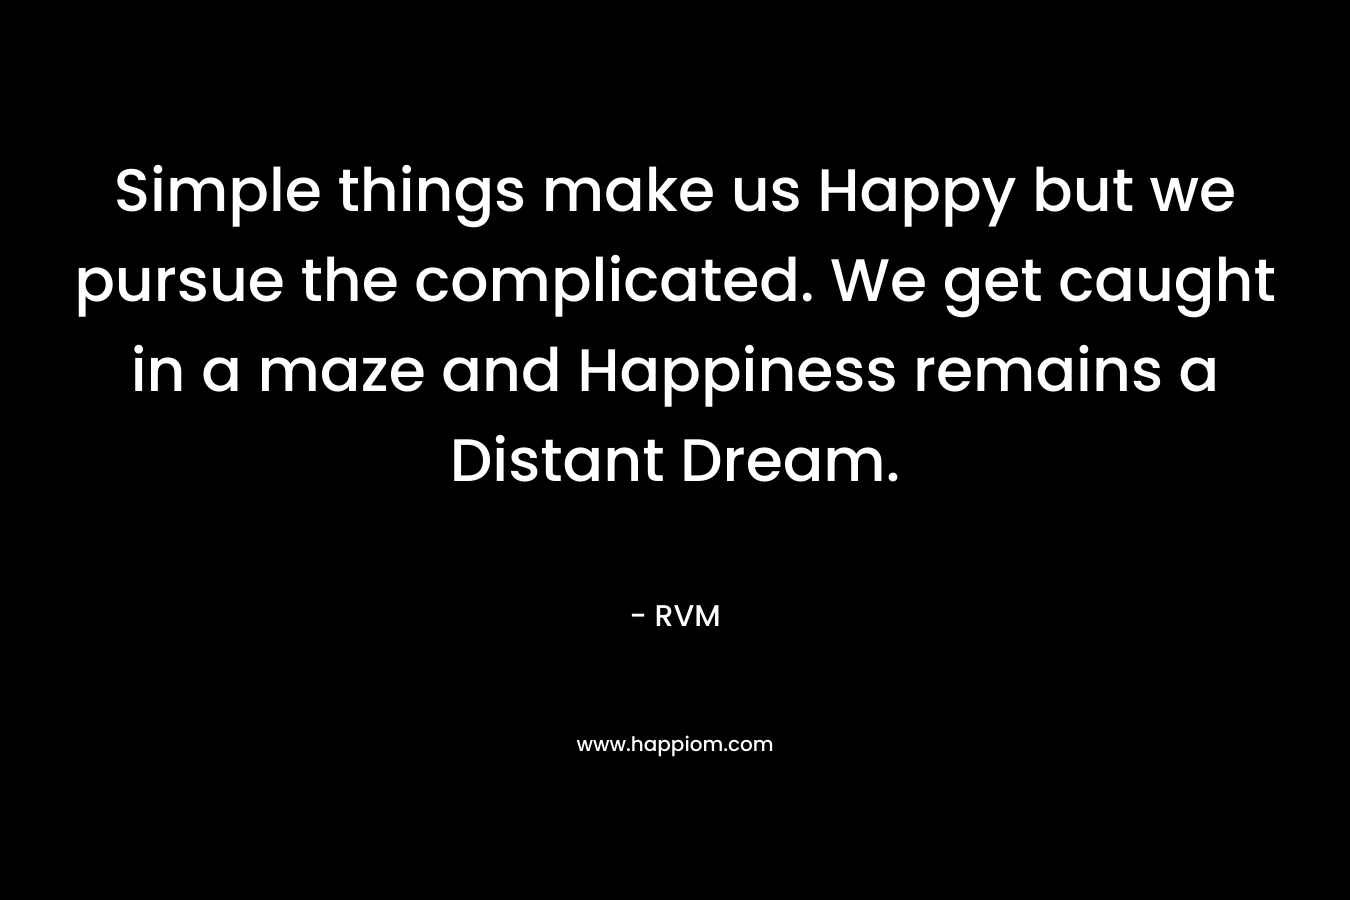 Simple things make us Happy but we pursue the complicated. We get caught in a maze and Happiness remains a Distant Dream. – RVM